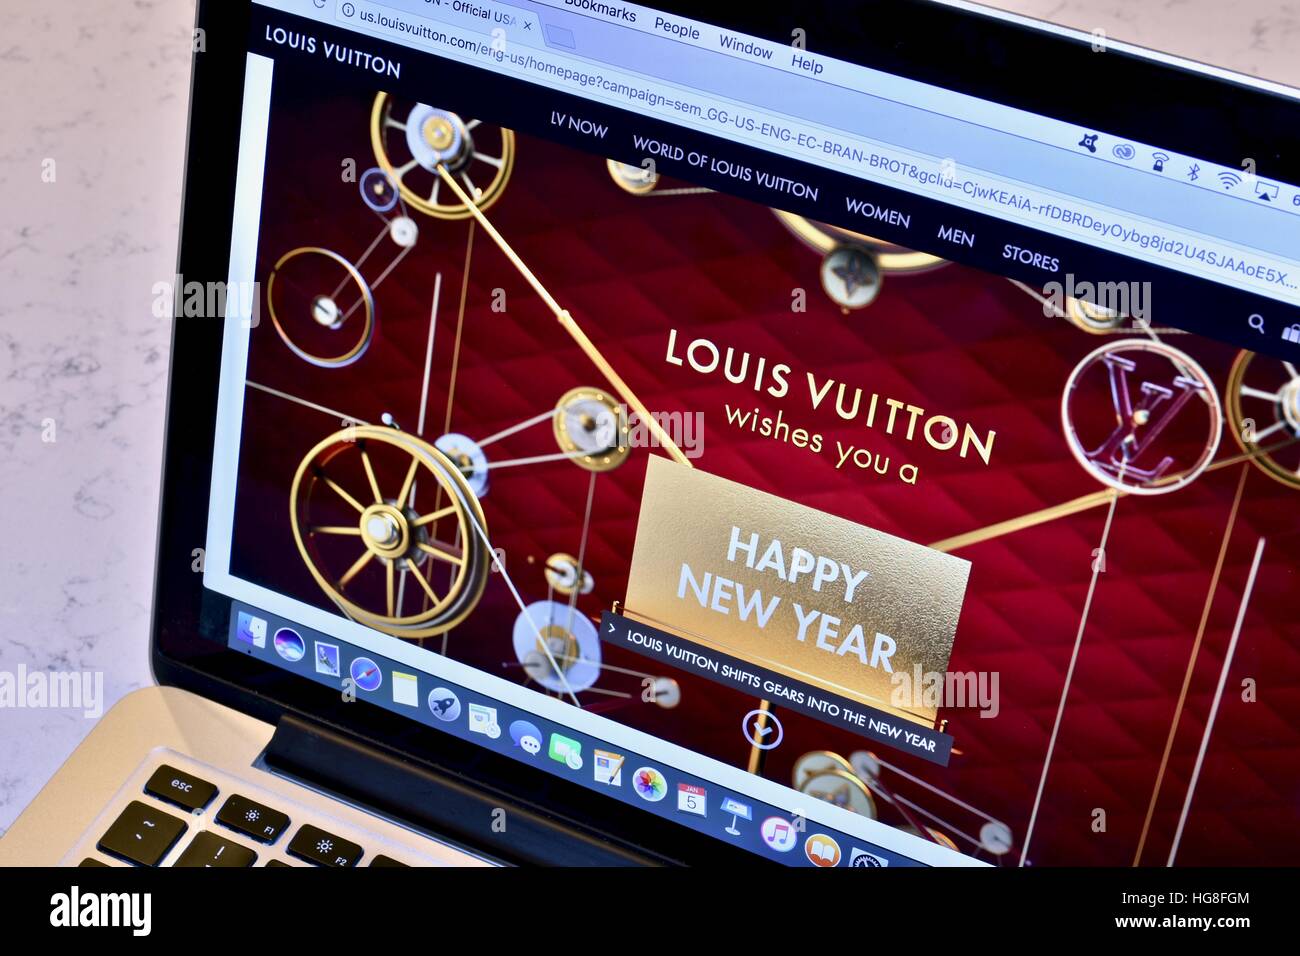 Louis vuitton web page hi-res stock photography and images - Alamy